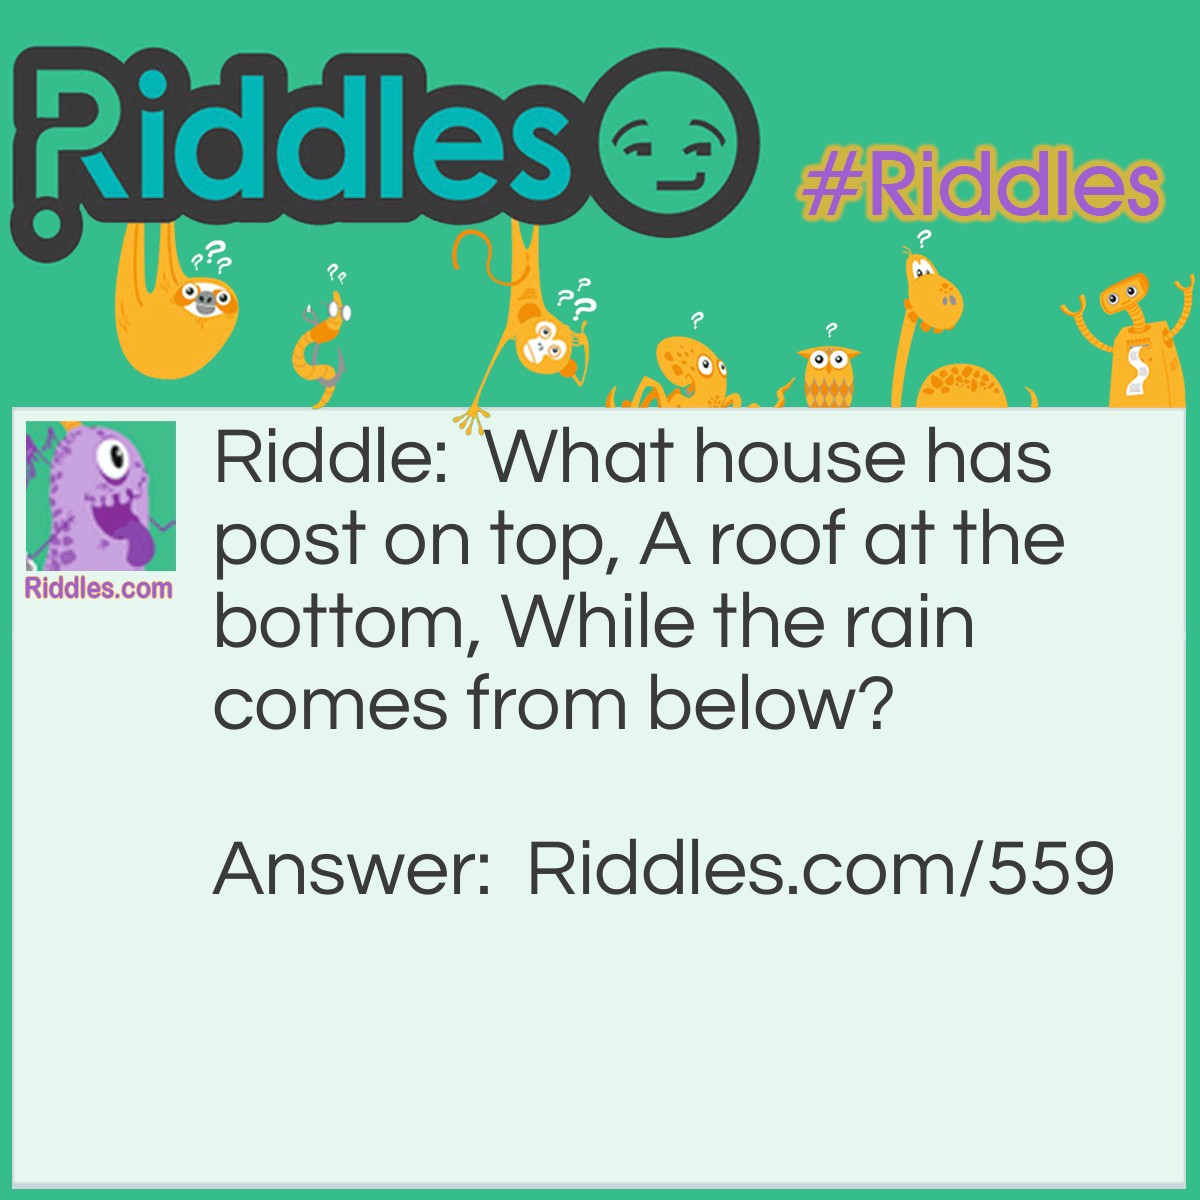 Riddle: What house has post on top, A roof at the bottom, While the rain comes from below? Answer: A boat.